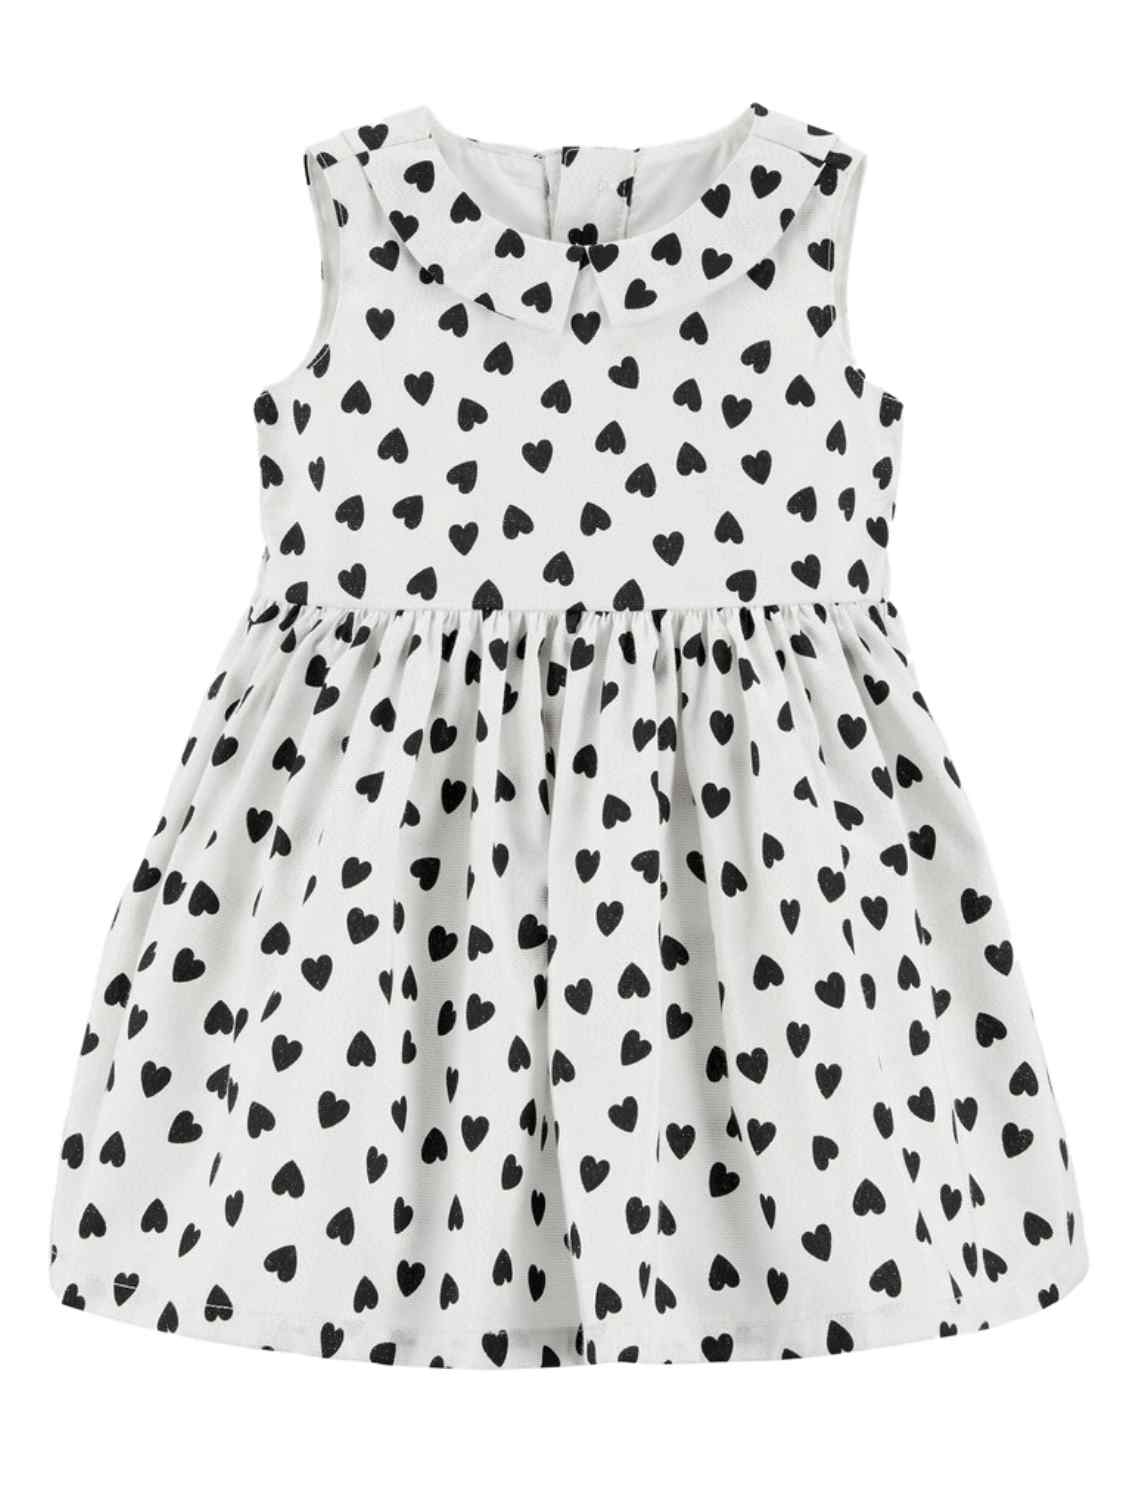 Carter's Carters Infant Girls Glitter White & Black Heart Holiday Party Dress 3 Months